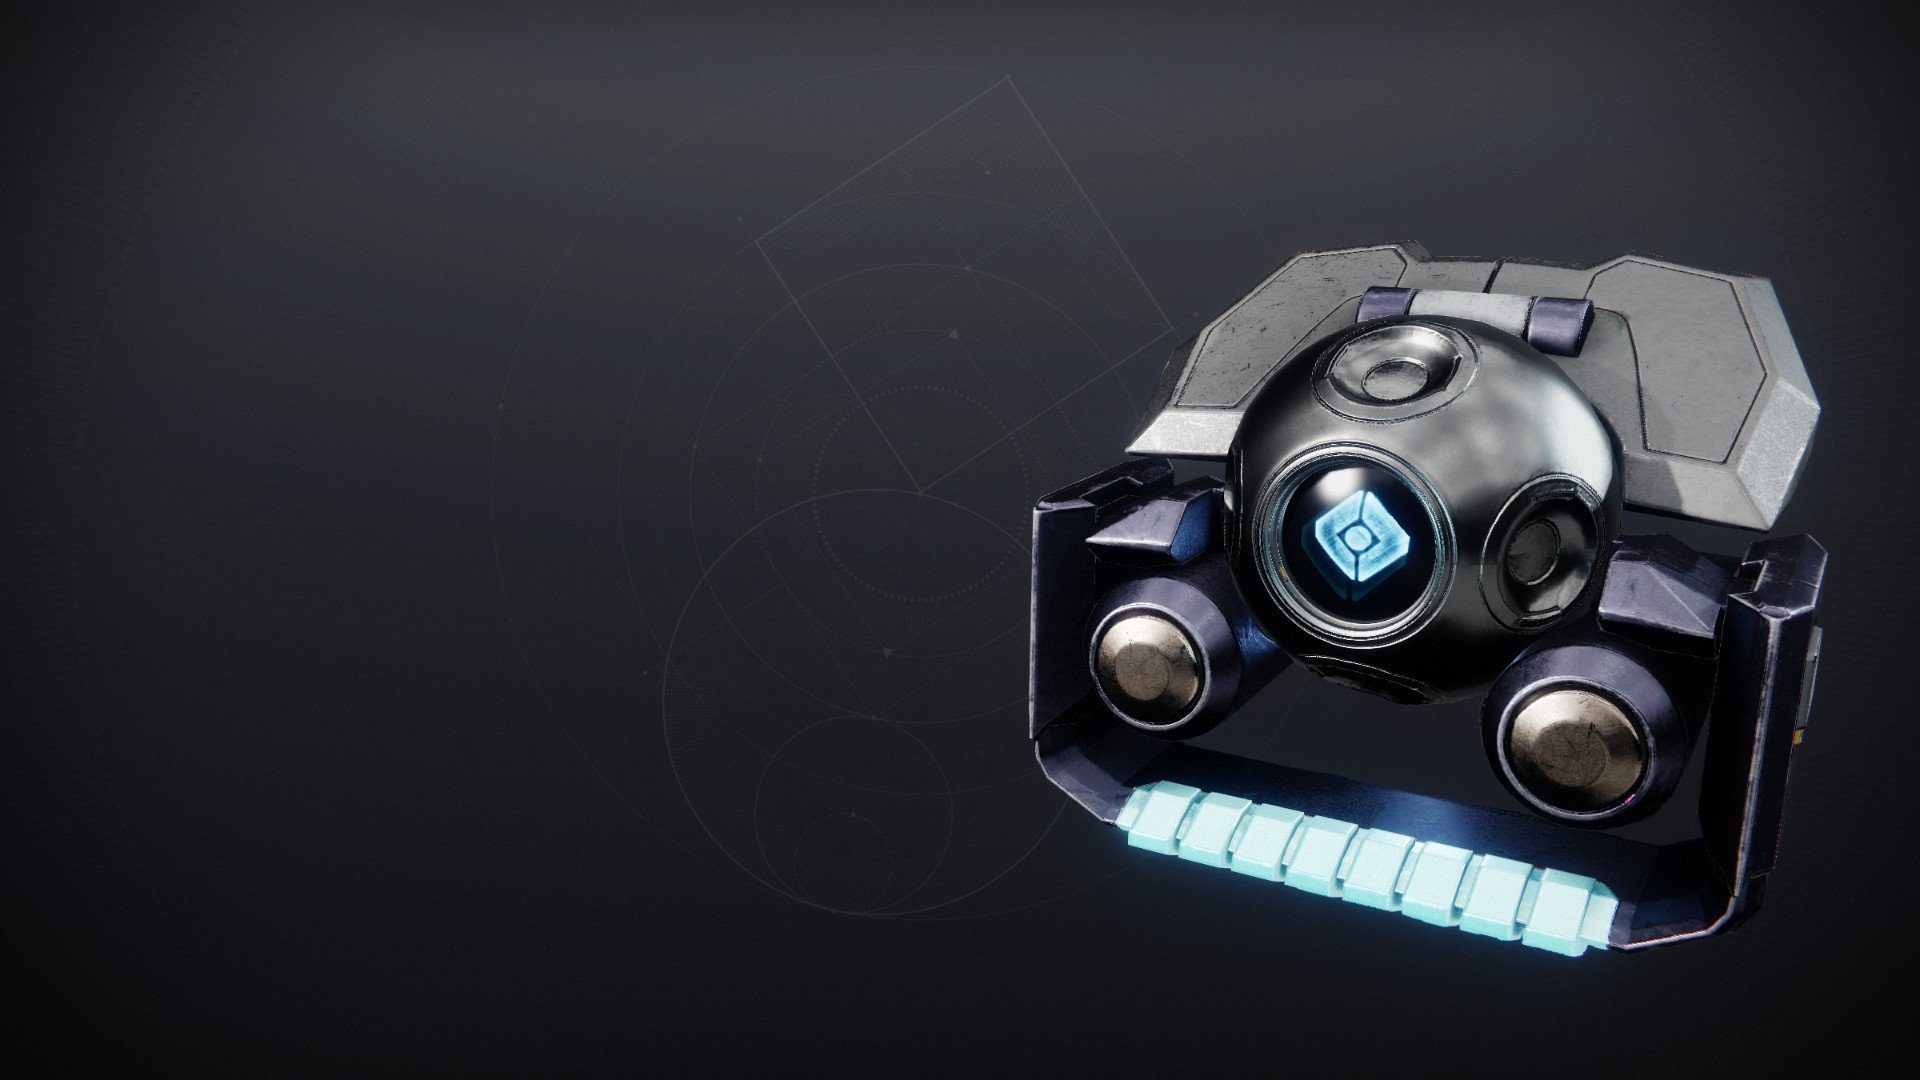 An in-game render of the Repulsor Shell.